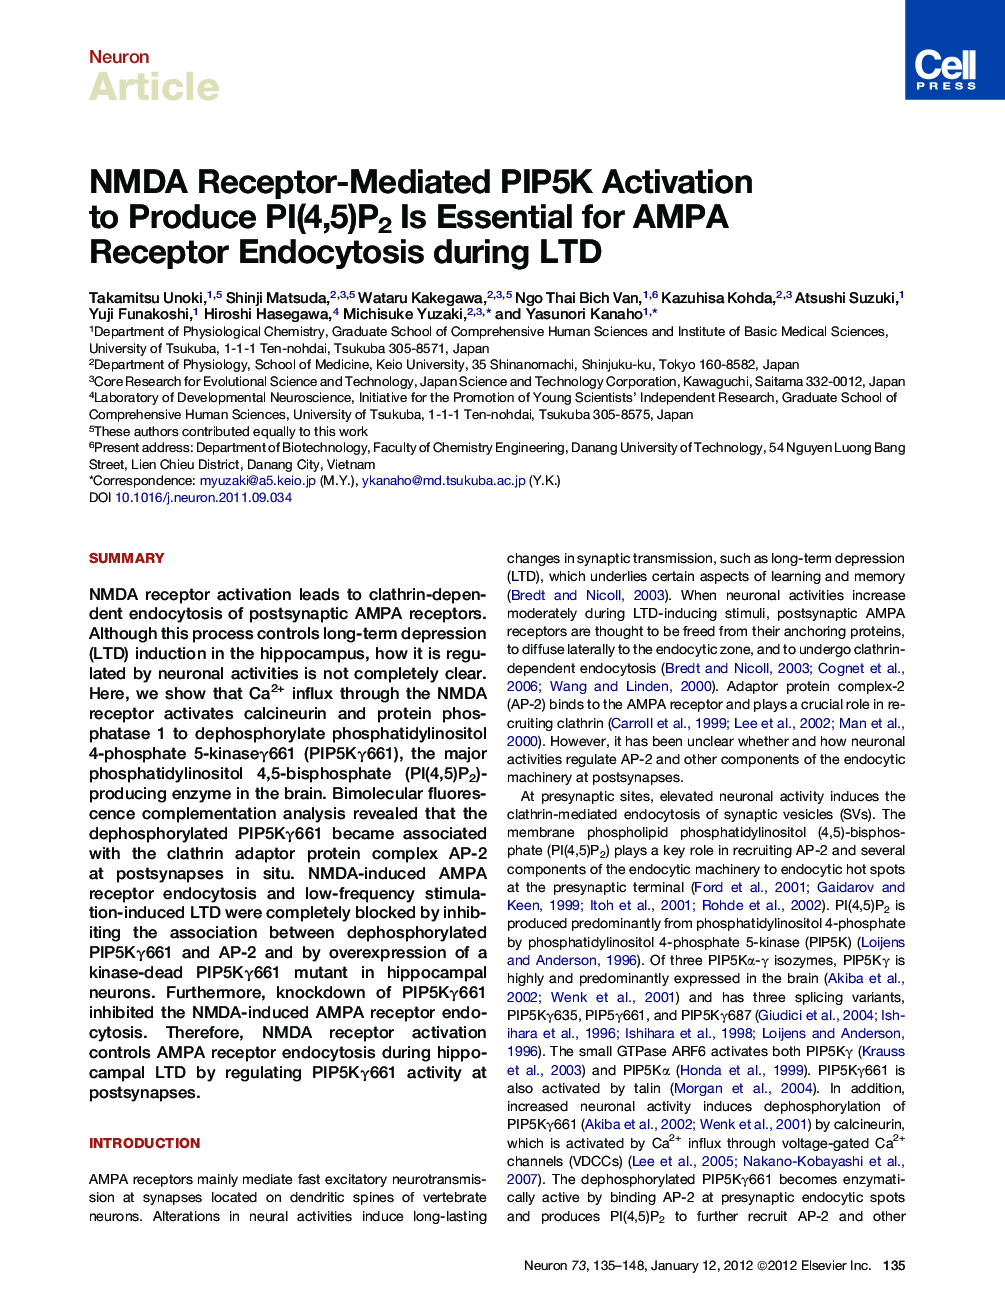 NMDA Receptor-Mediated PIP5K Activation to Produce PI(4,5)P2 Is Essential for AMPA Receptor Endocytosis during LTD